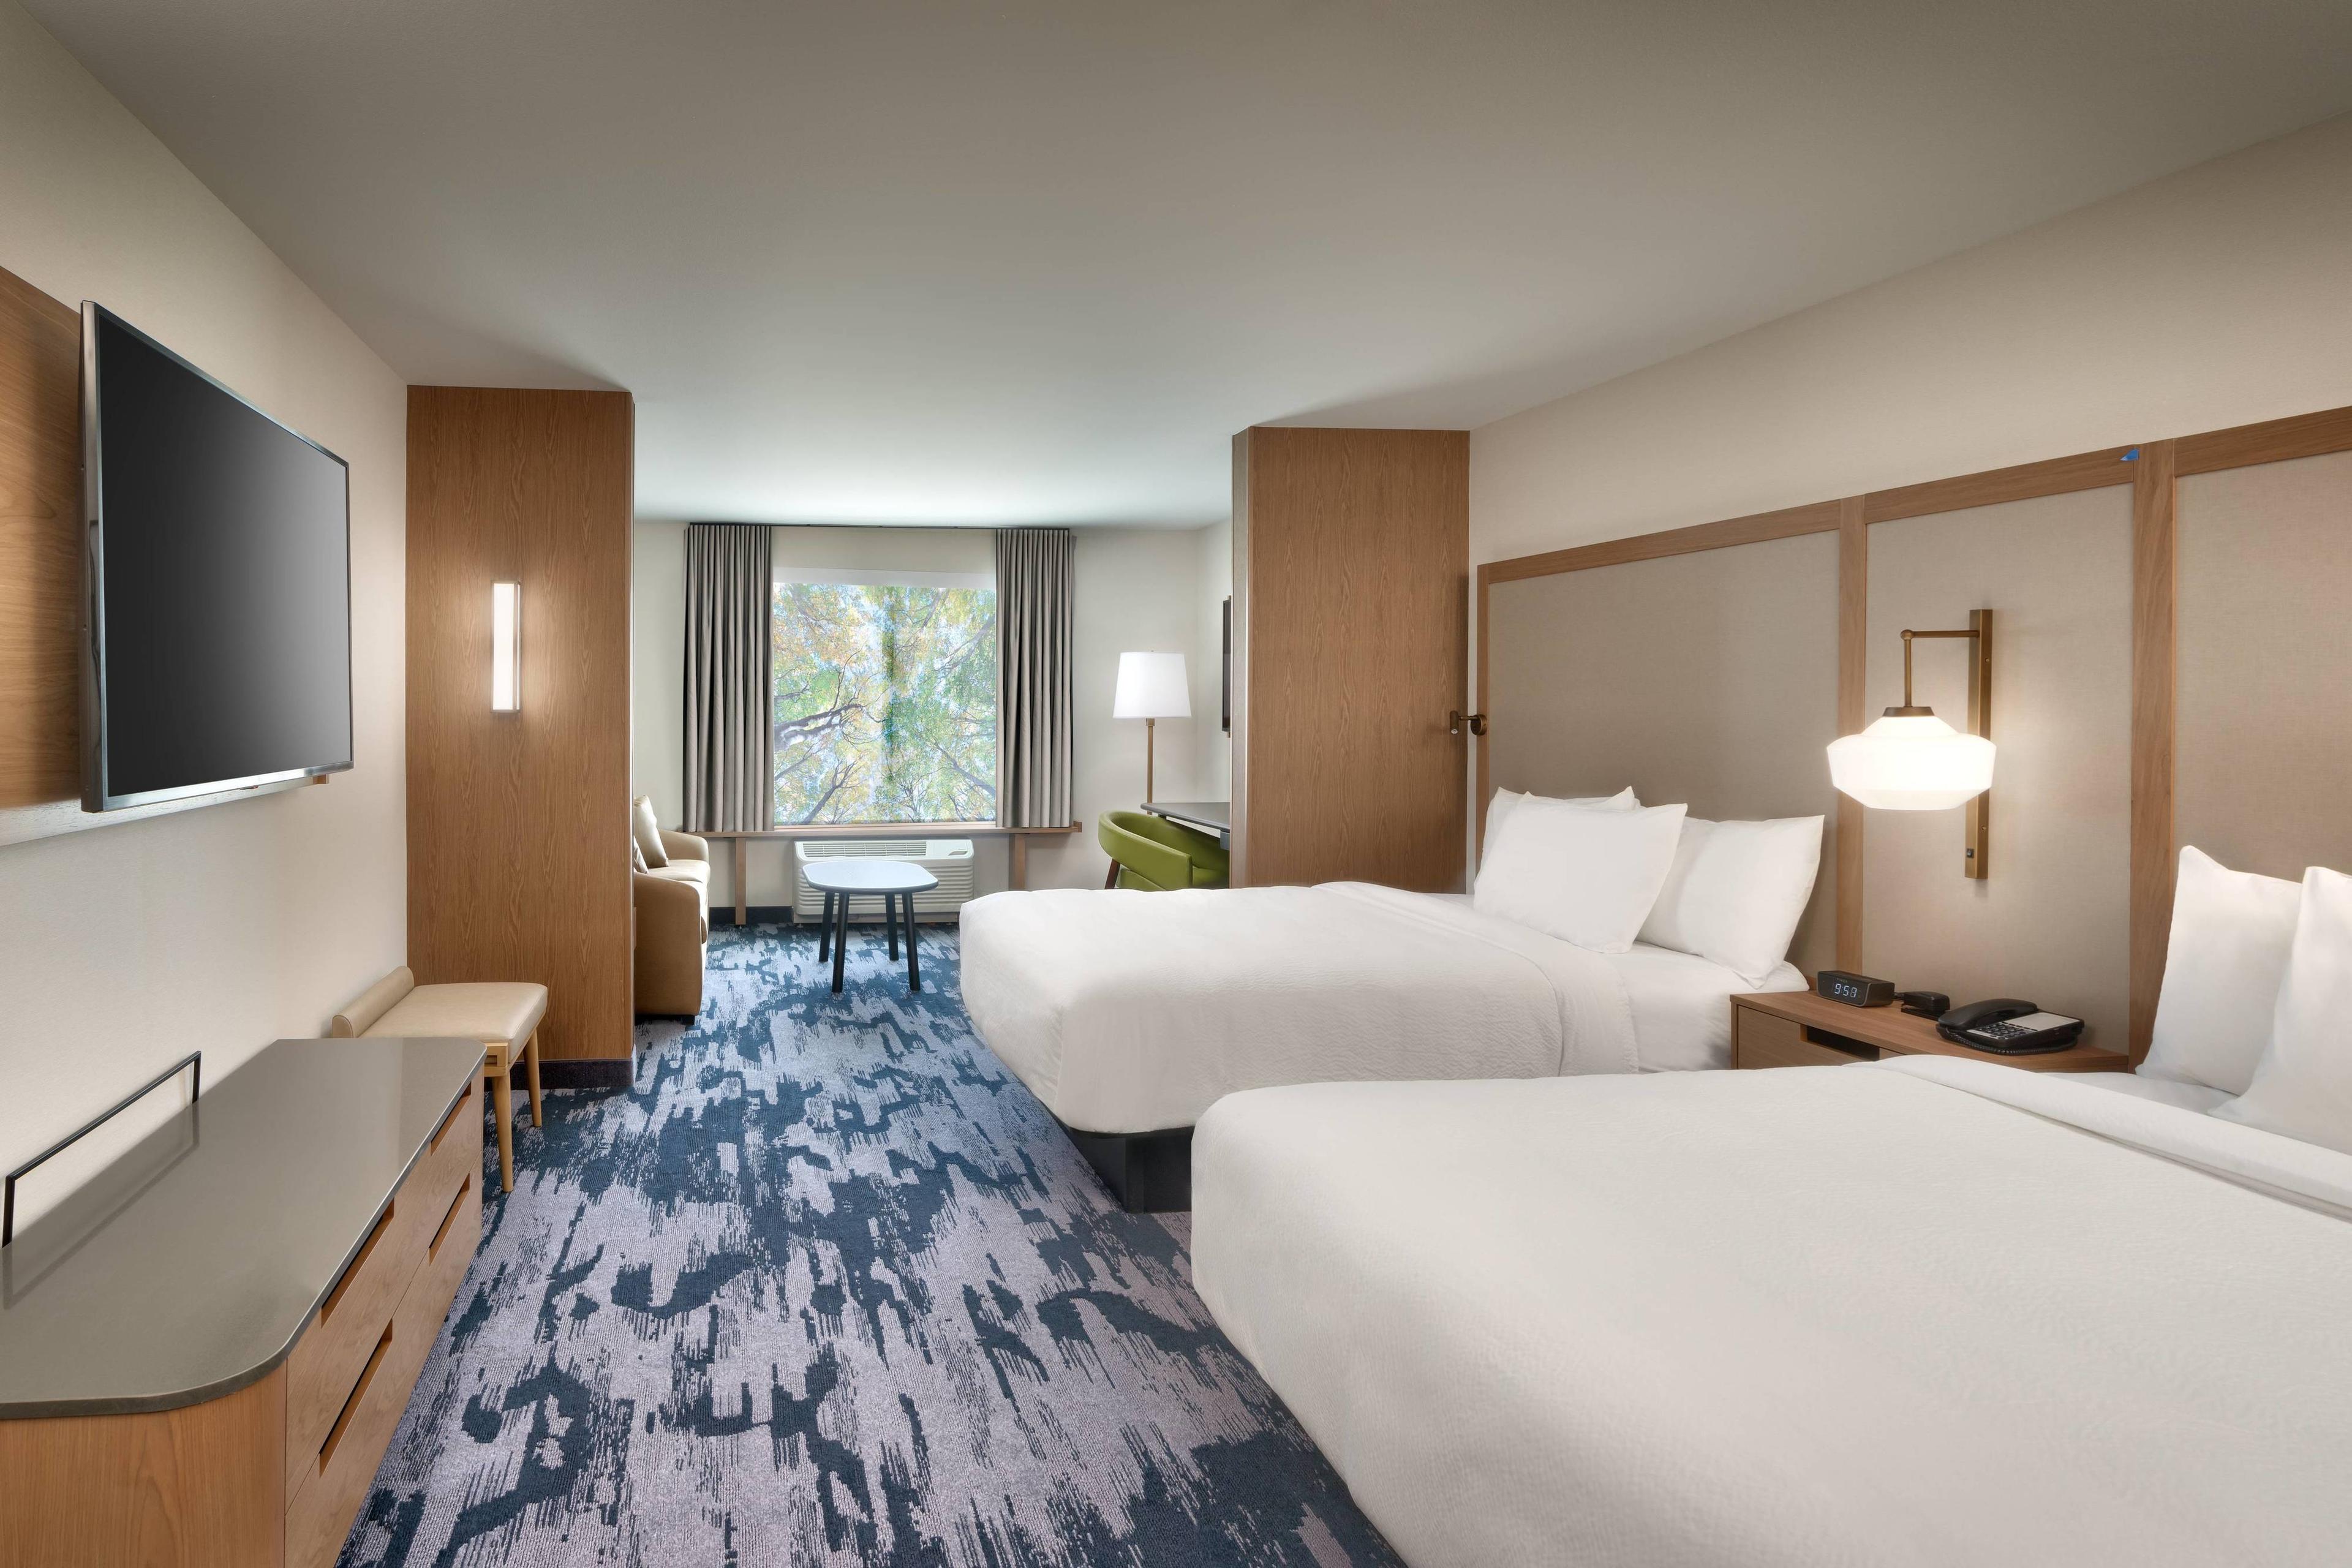 Rest and relax in our rooms featuring separate living and sleeping areas. Suites can accommodate your entire travel party thanks to our comfortable pullout sofas.